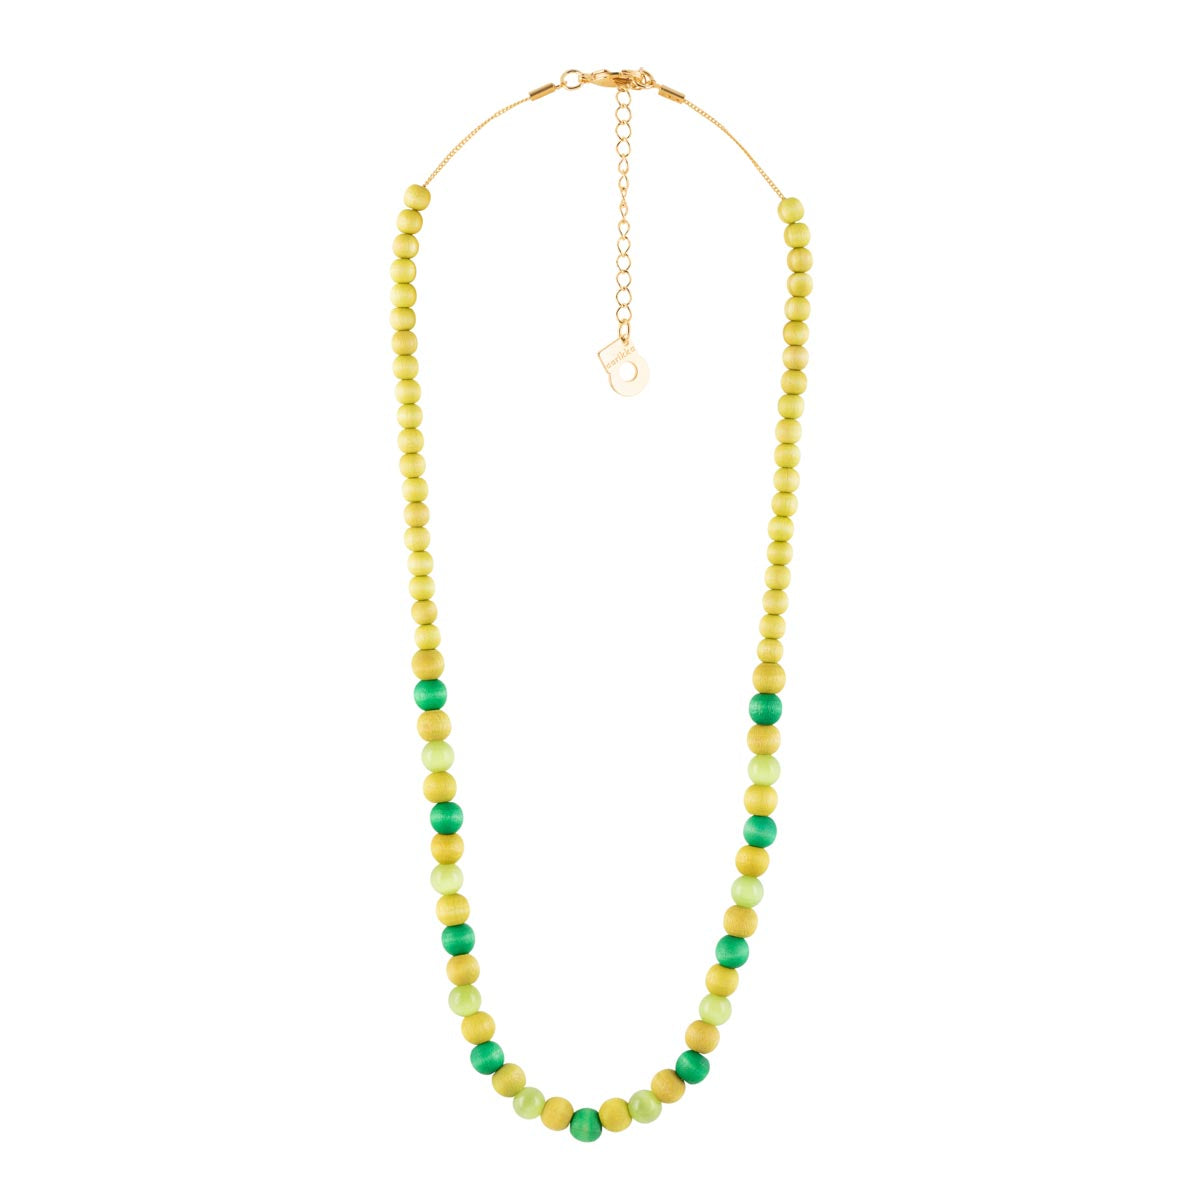 Lydia necklace, green and gold